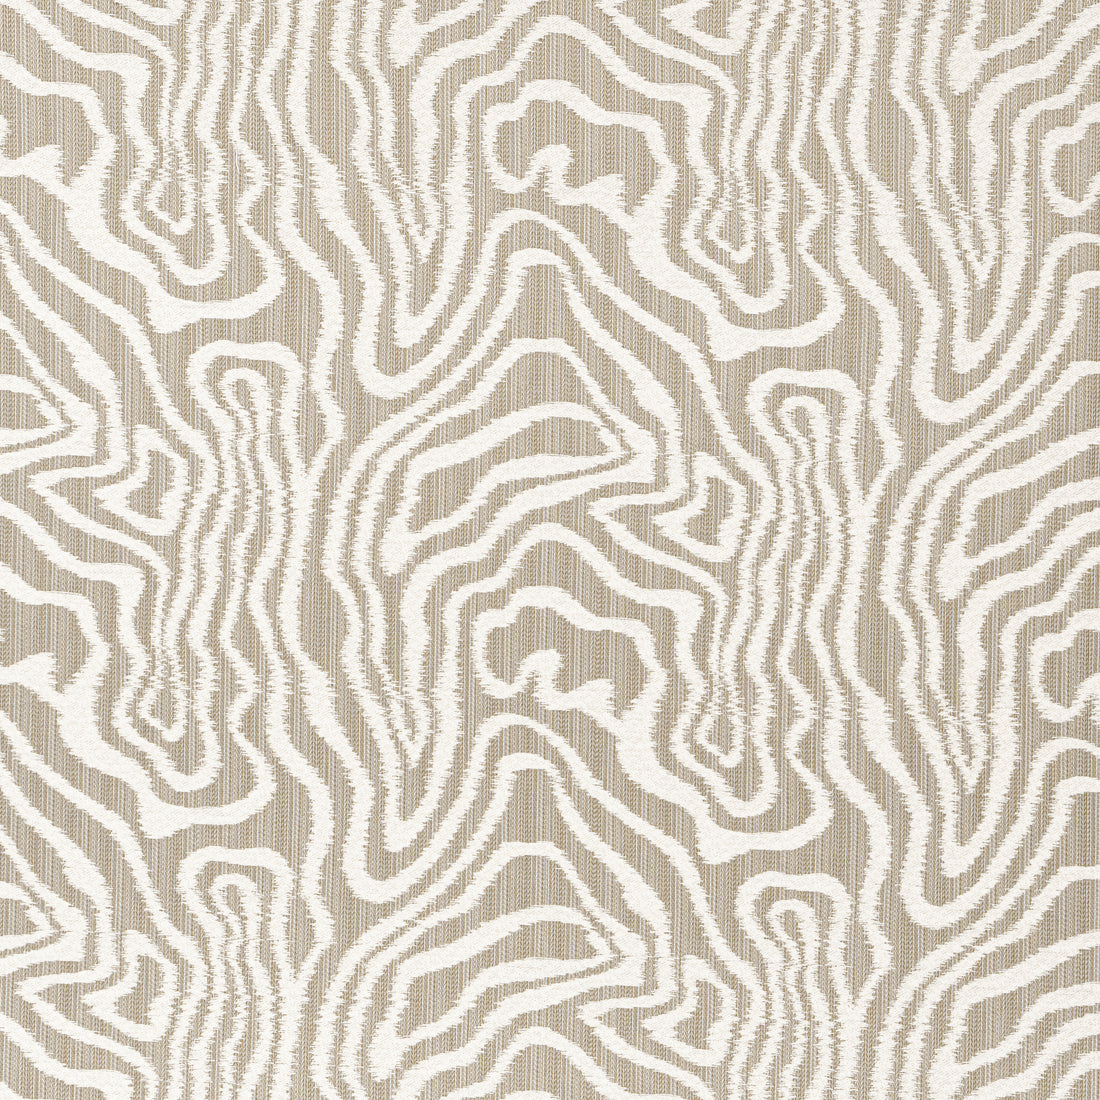 Alessandro fabric in taupe - pattern number W713612 - by Thibaut in the Grand Palace collection